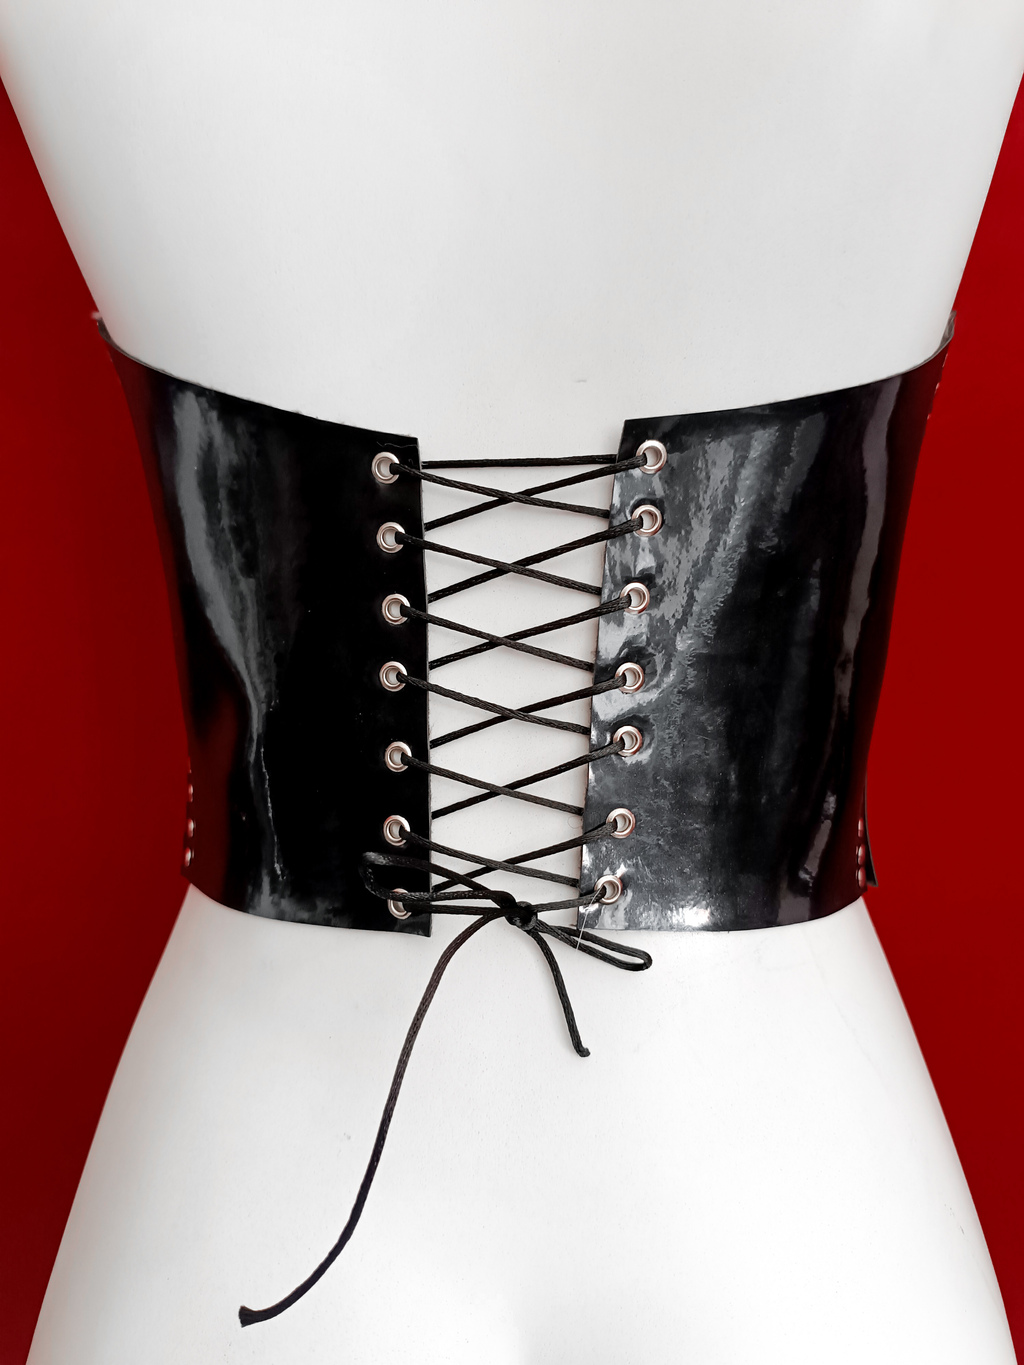 Leather corset top Large $55